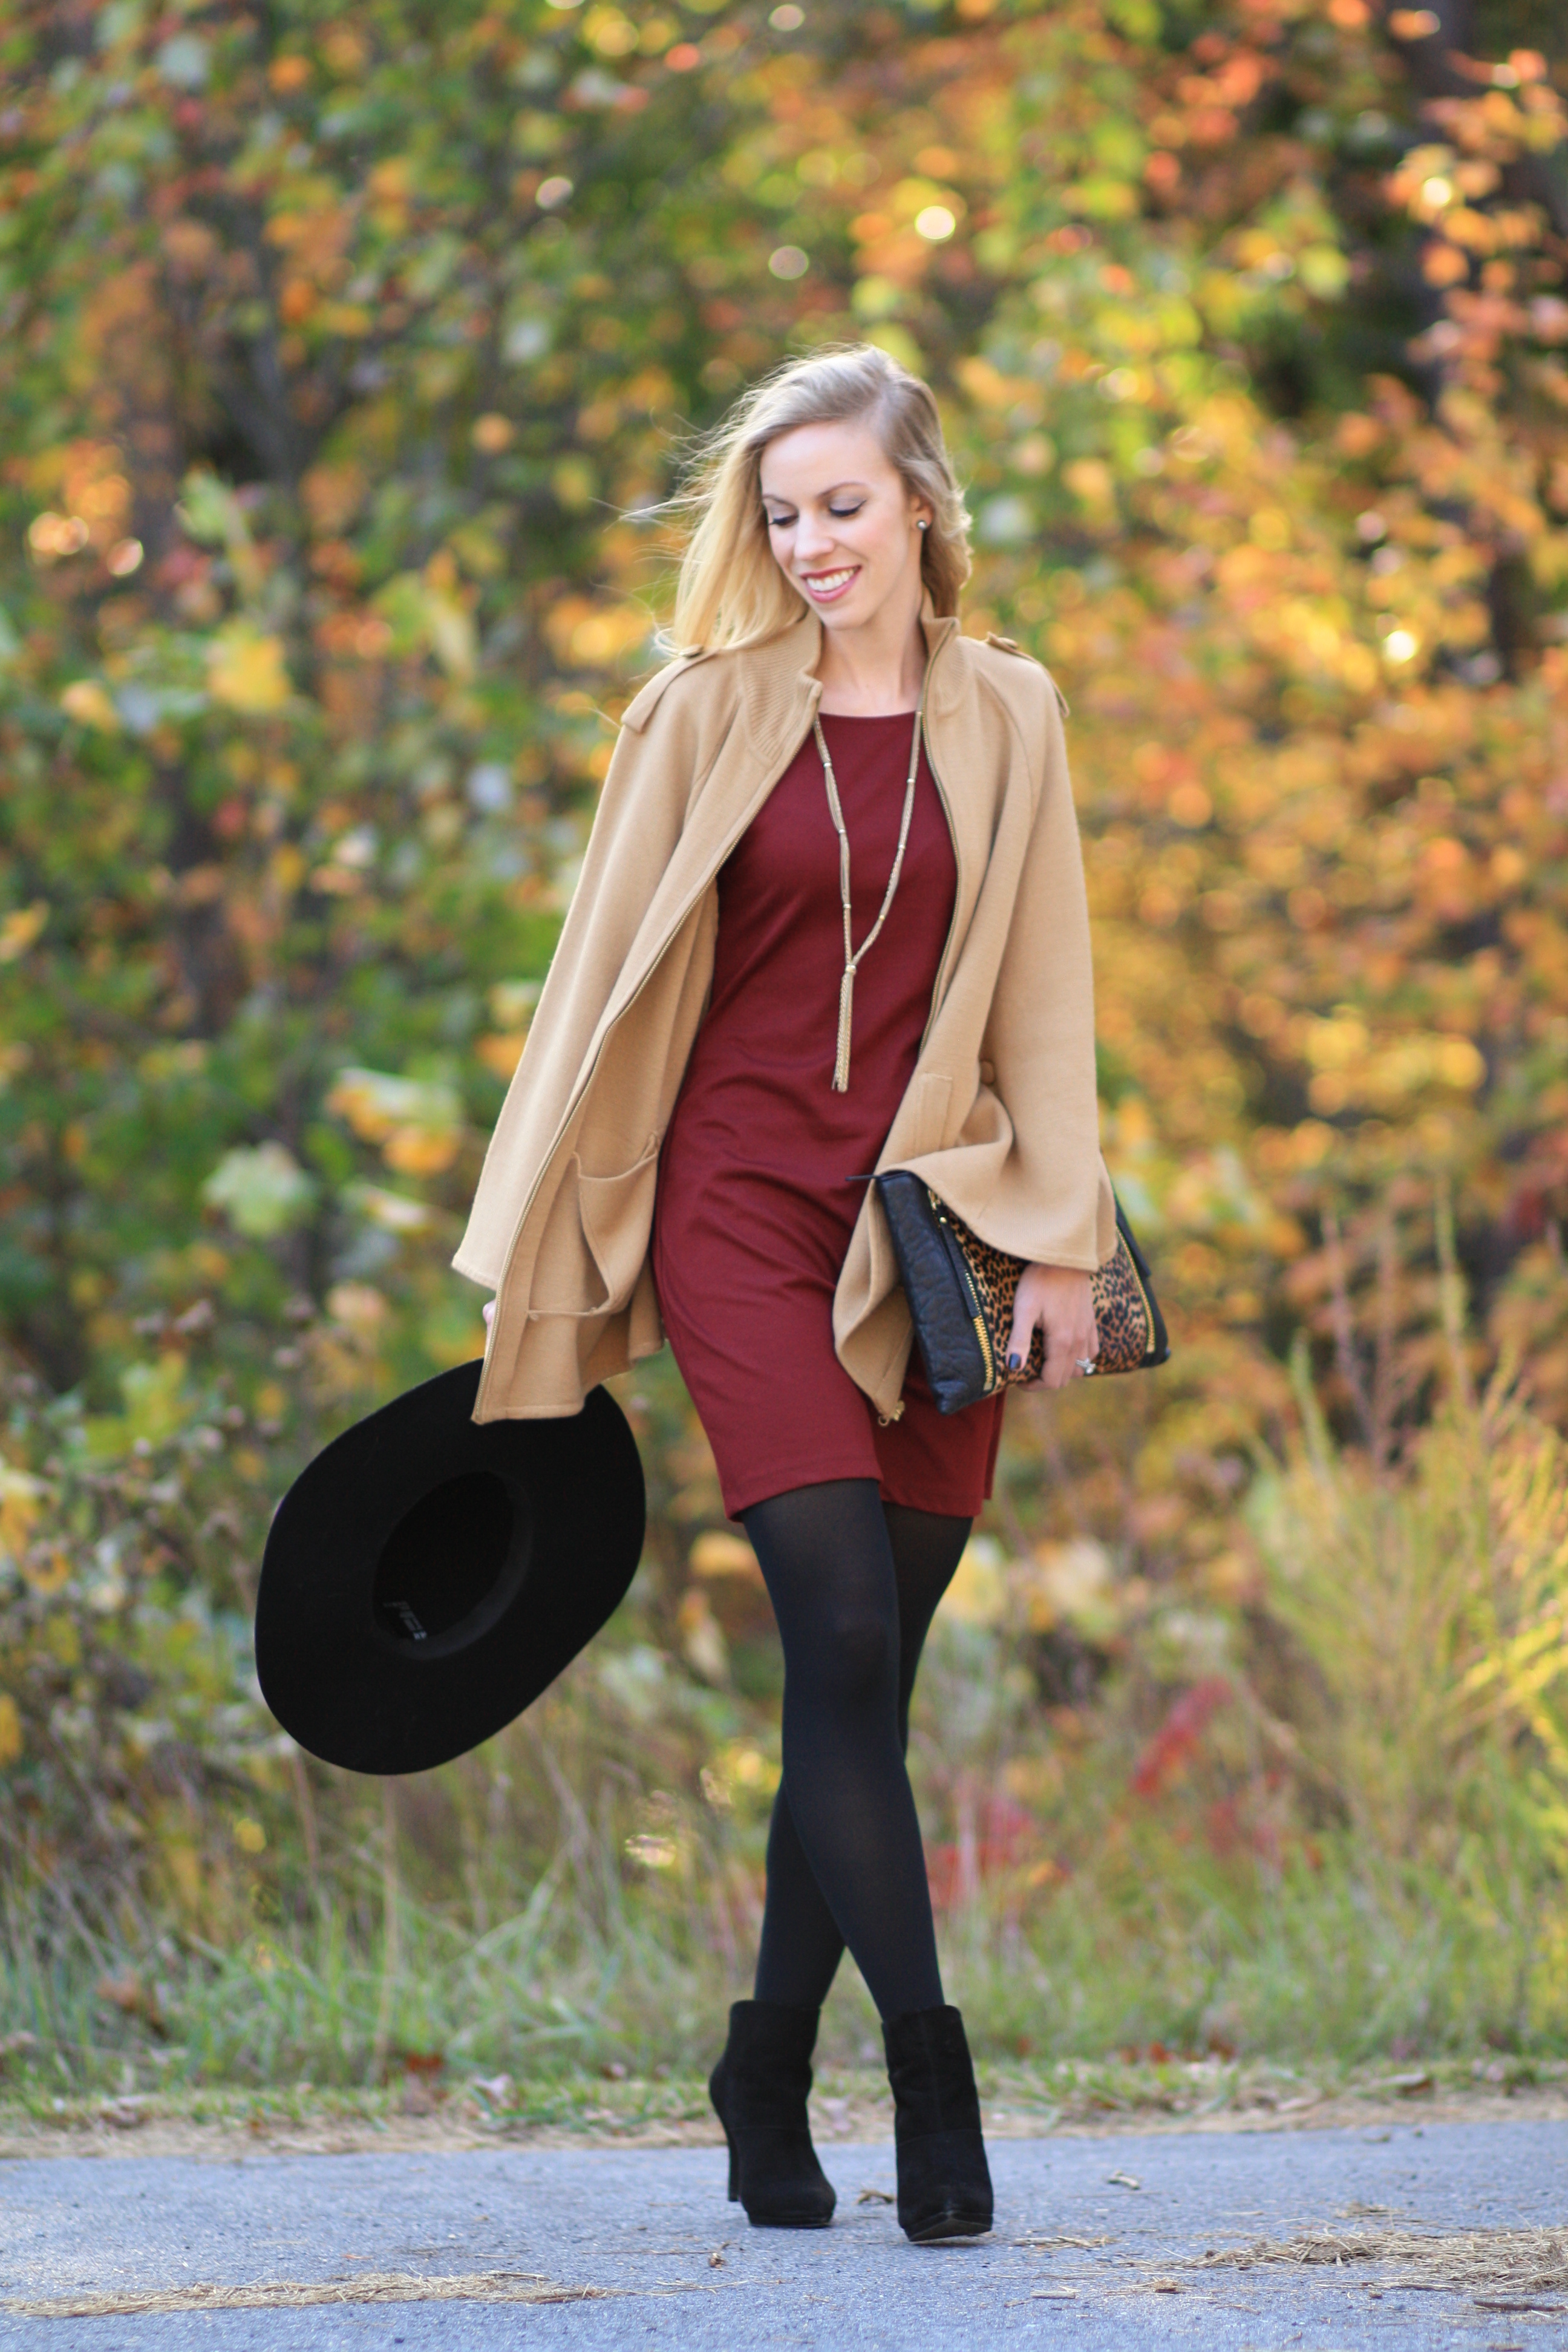 Black Tights with Beige Boots Outfits (10 ideas & outfits)